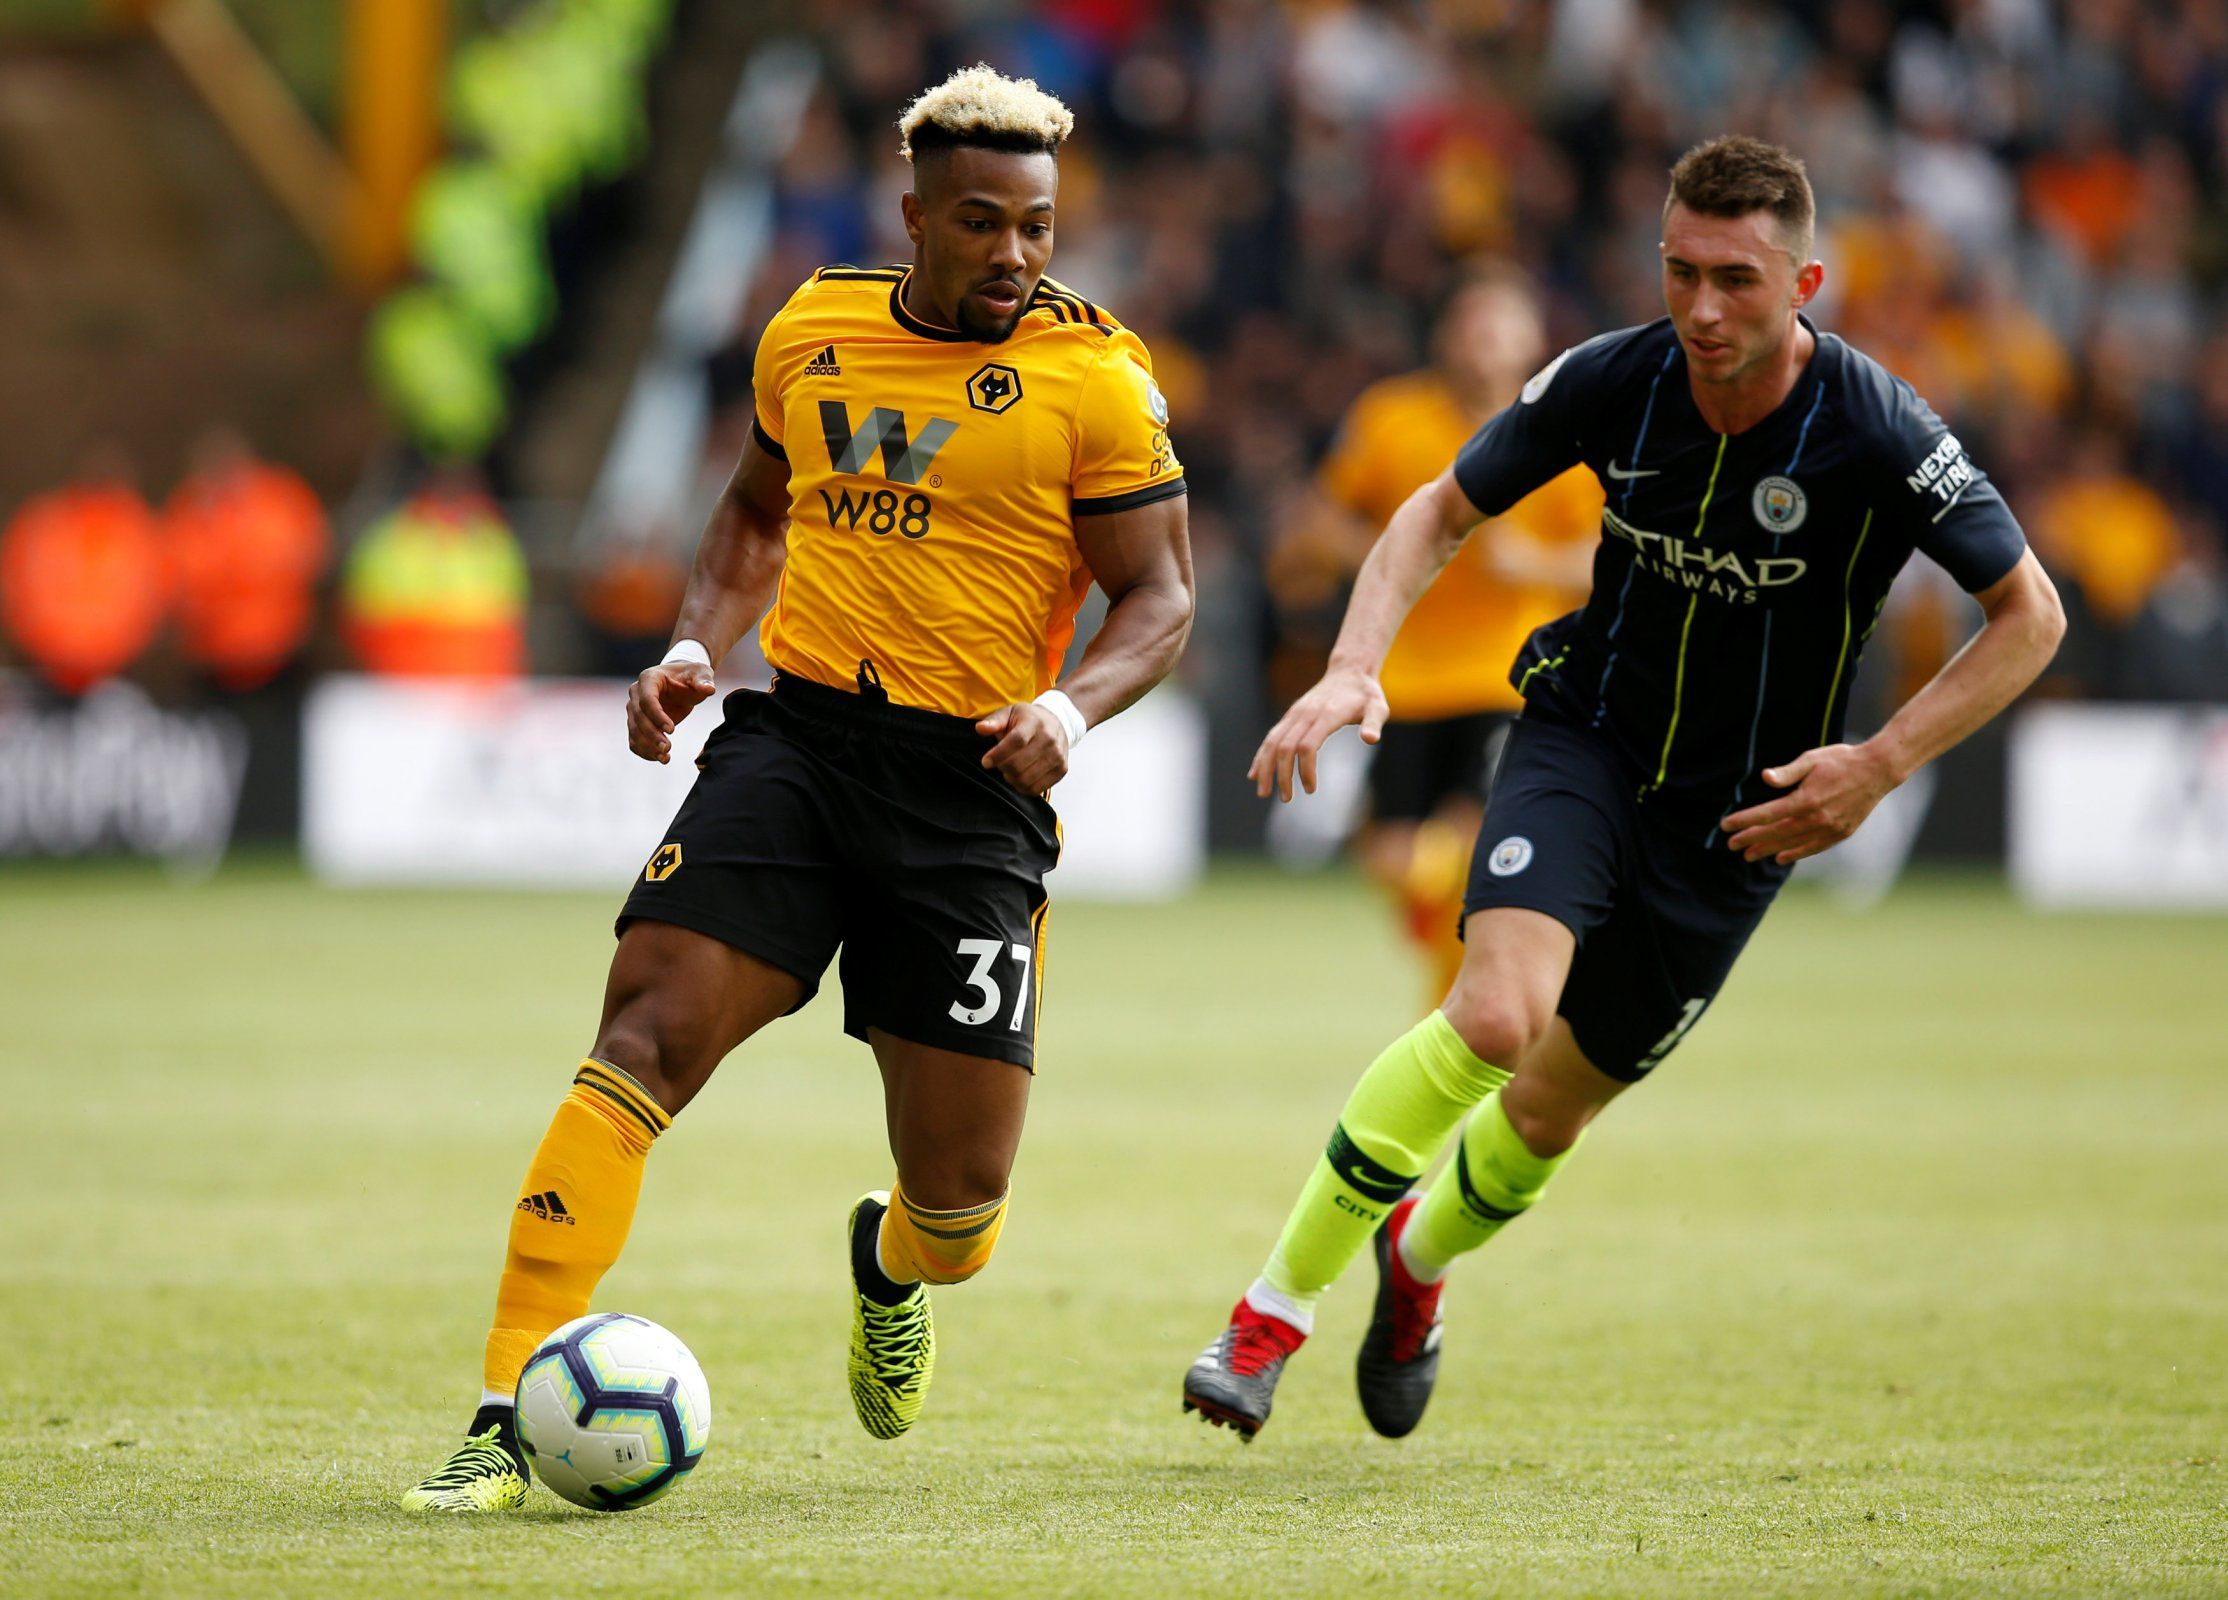 Wolves winger Adama Traore gets away from Man City defender Aymeric Laporte